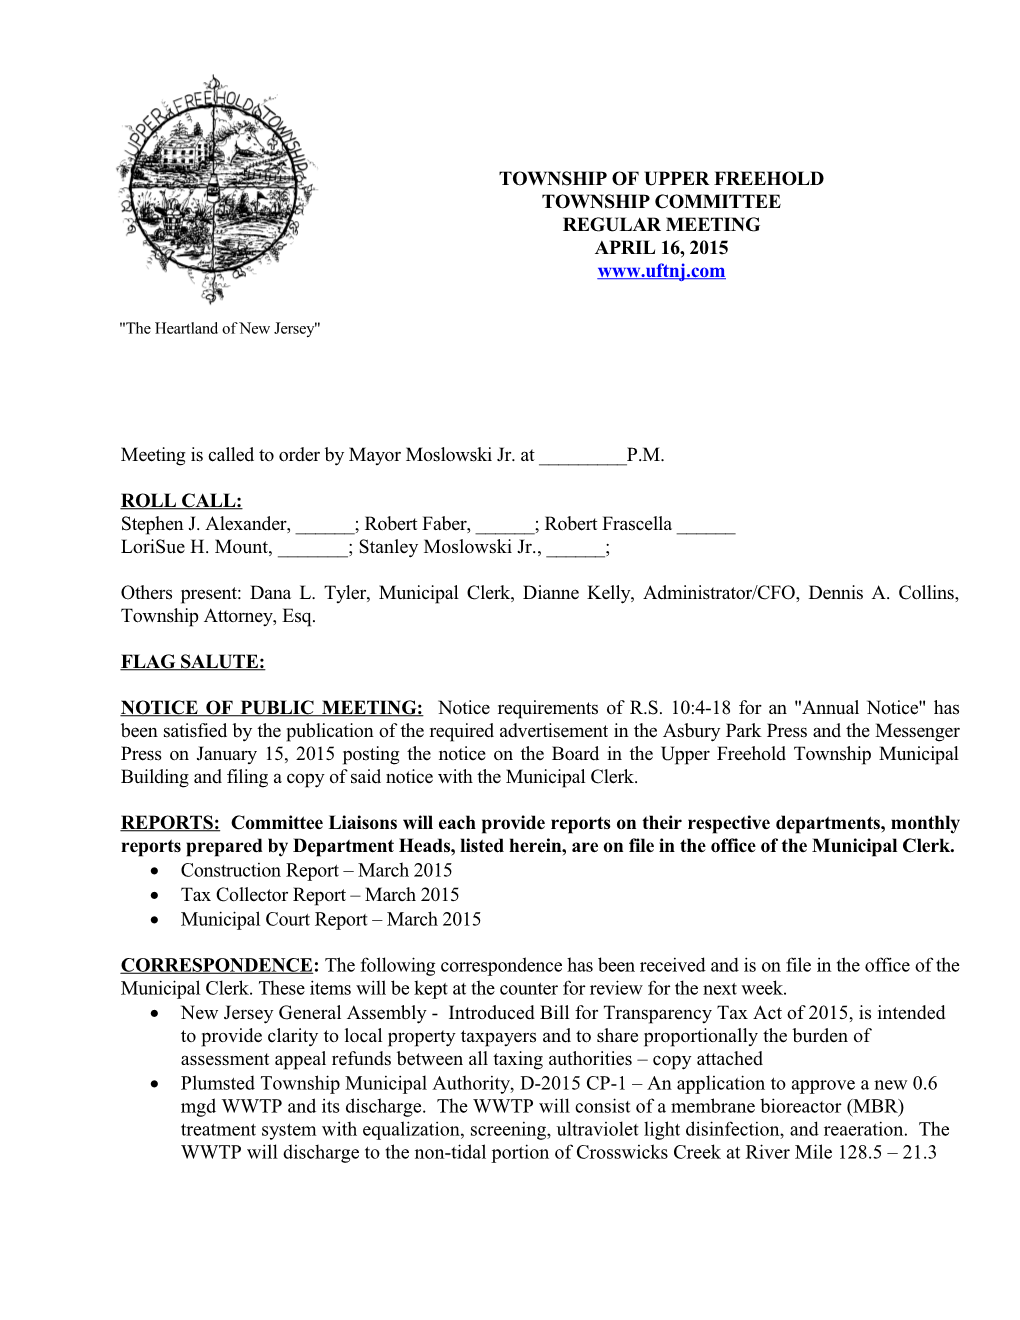 Upper Freehold Township Committee Regular Meeting April 16, 2015